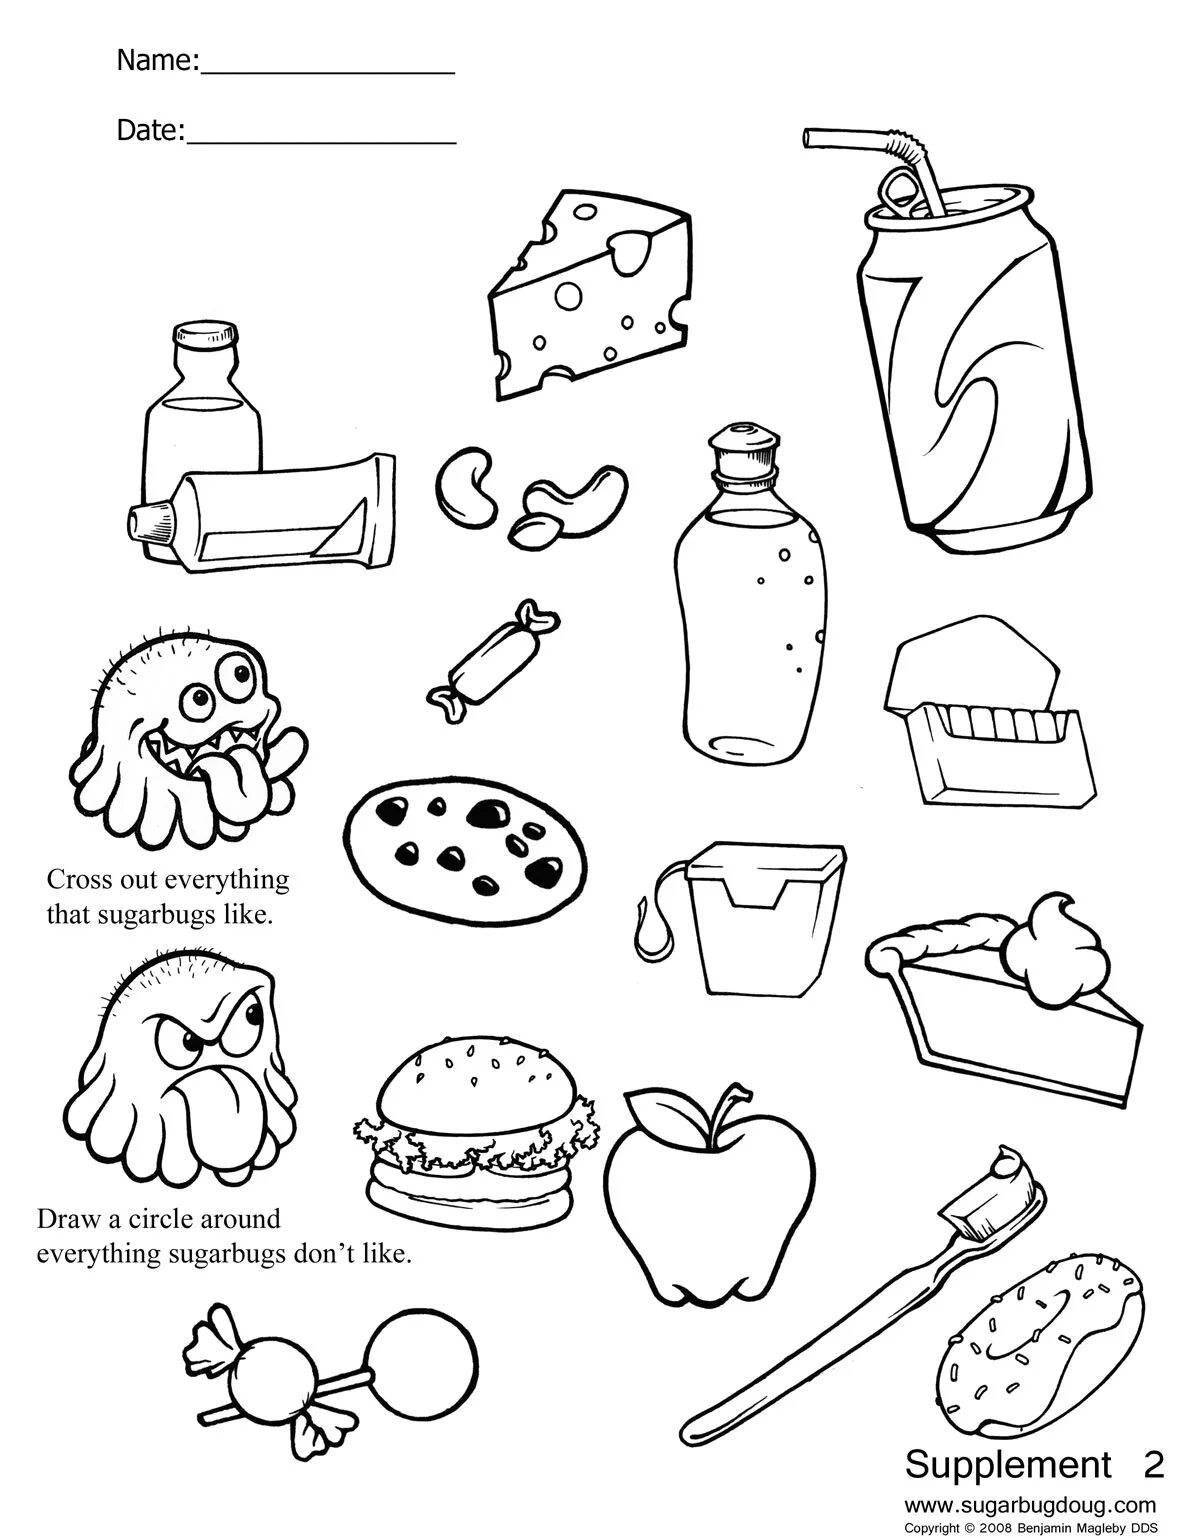 A fun food coloring book for kids aged 6-7